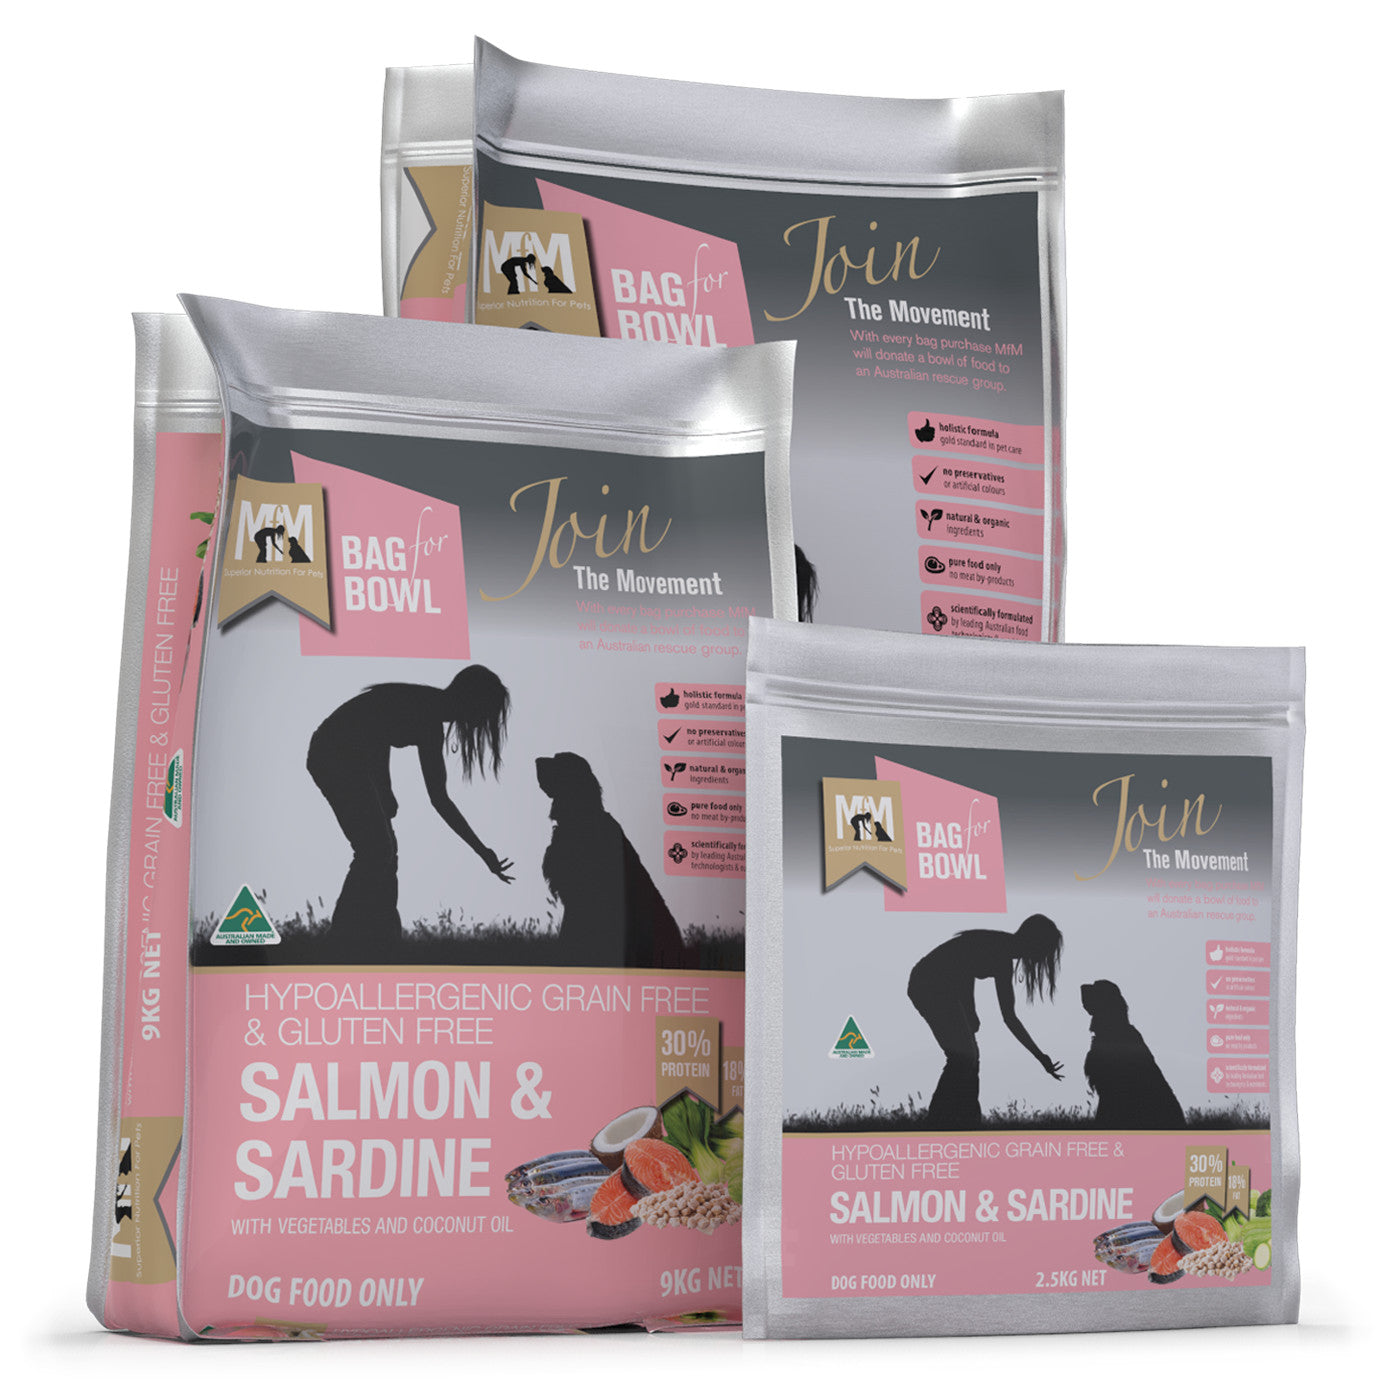 Meals for Mutts Grain Free Salmon and Sardine Dog Food.